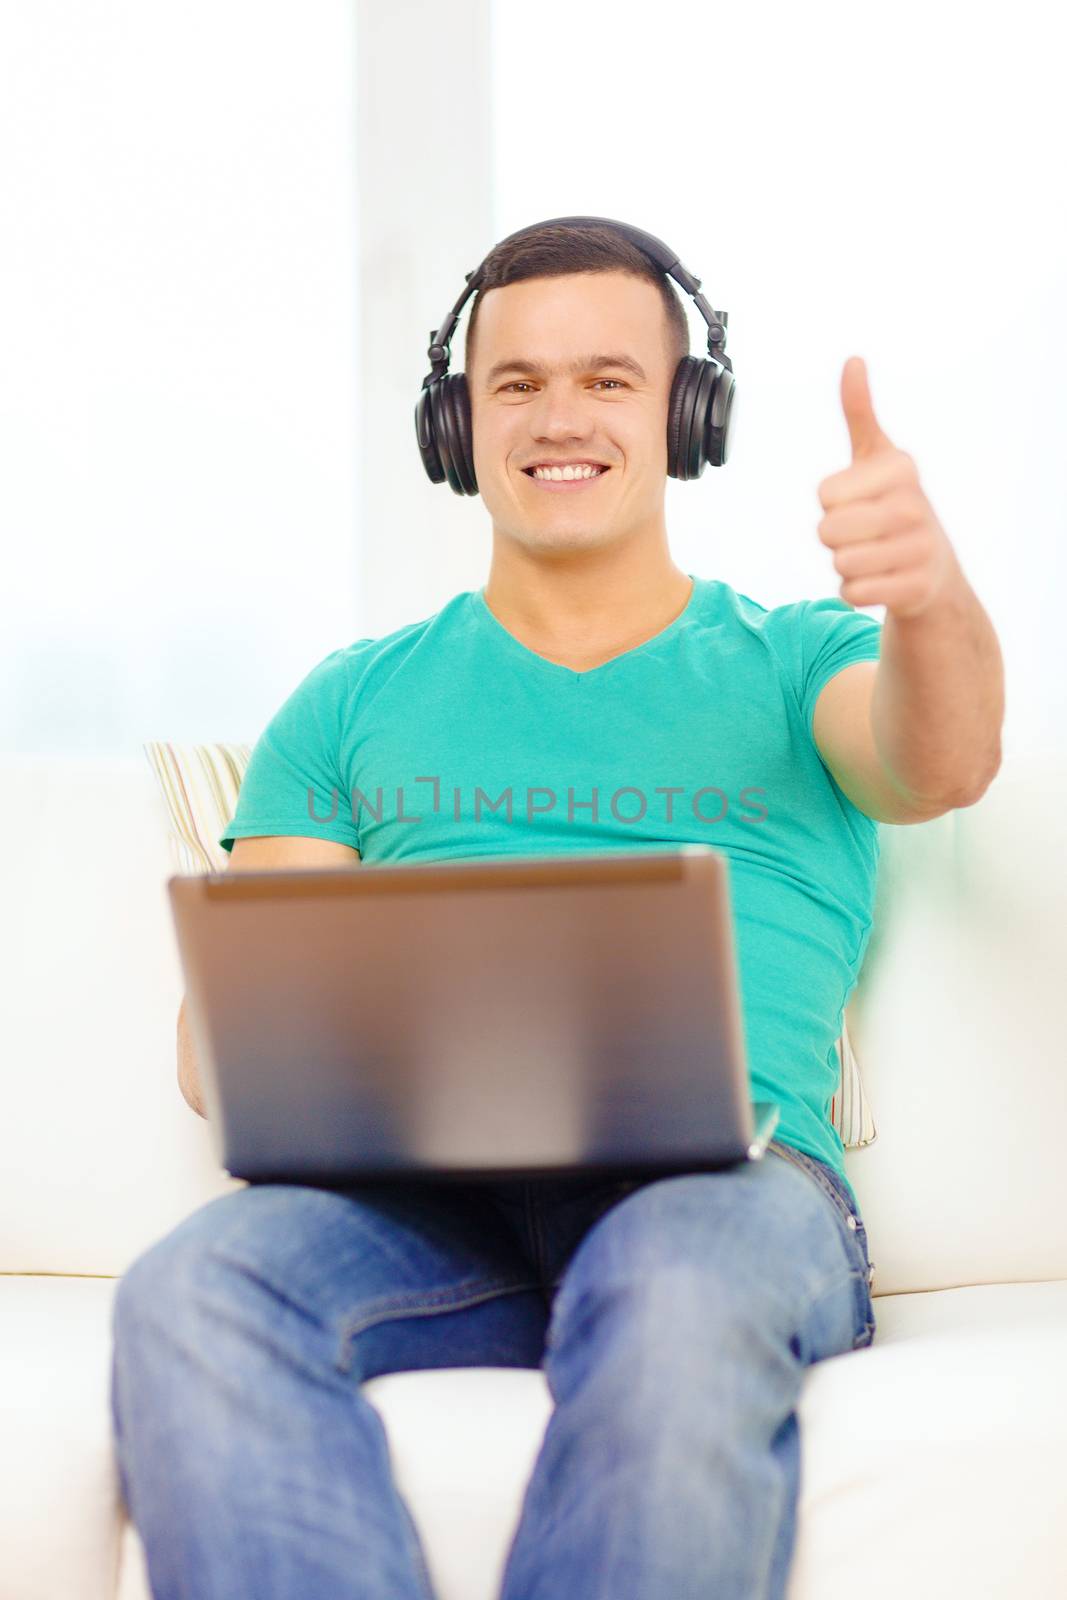 technology, home, music and lifestyle concept - smiling man with laptop and headphones at home showing thumbs up